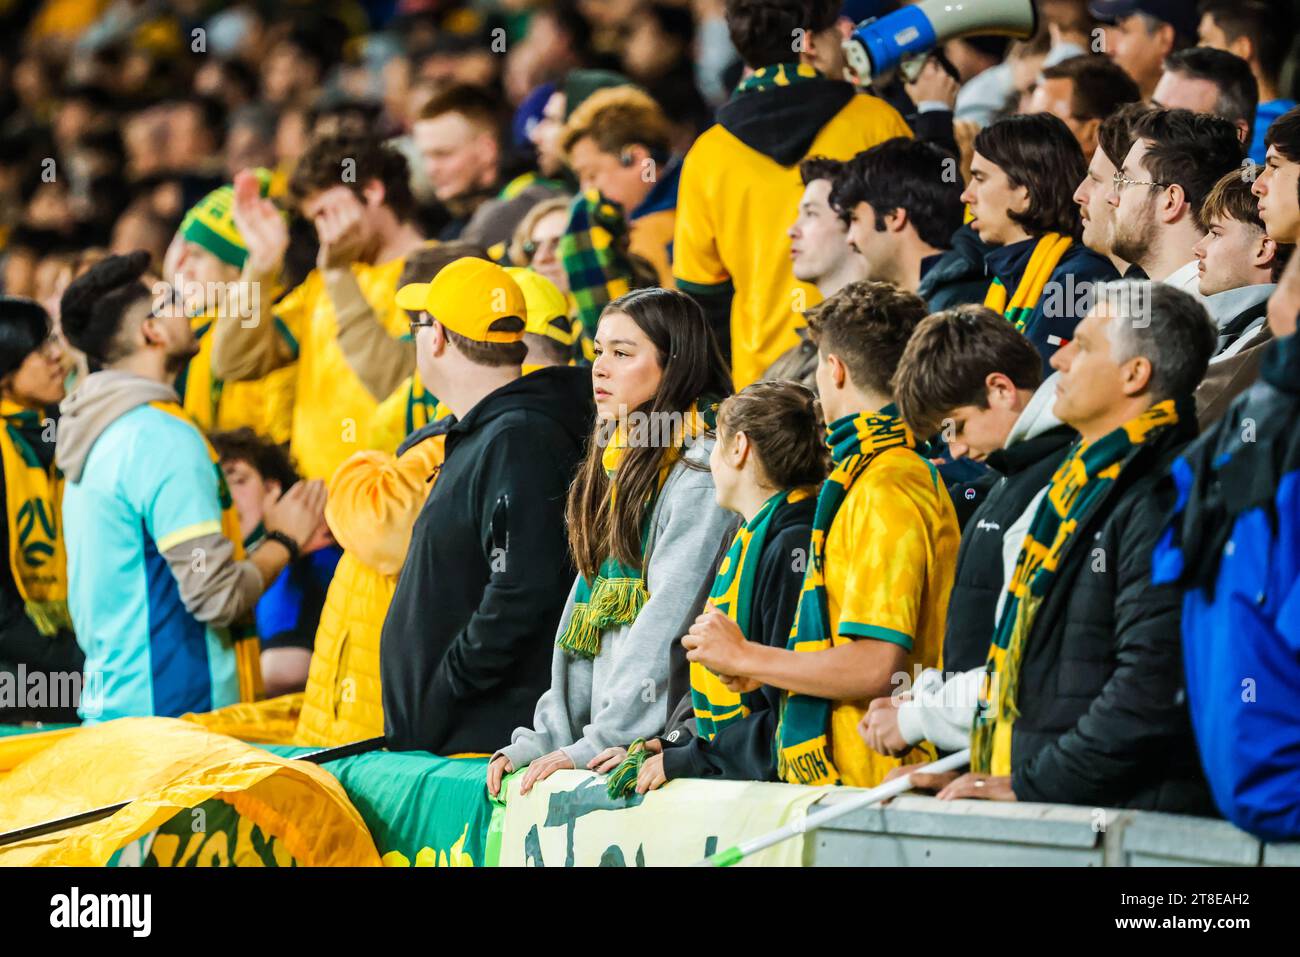 MELBOURNE, AUSTRALIA - NOVEMBER 16: Atmosphere during the 2026 FIFA World Cup Qualifier match between Australia Socceroos and Bangladesh at AAMI Park Stock Photo